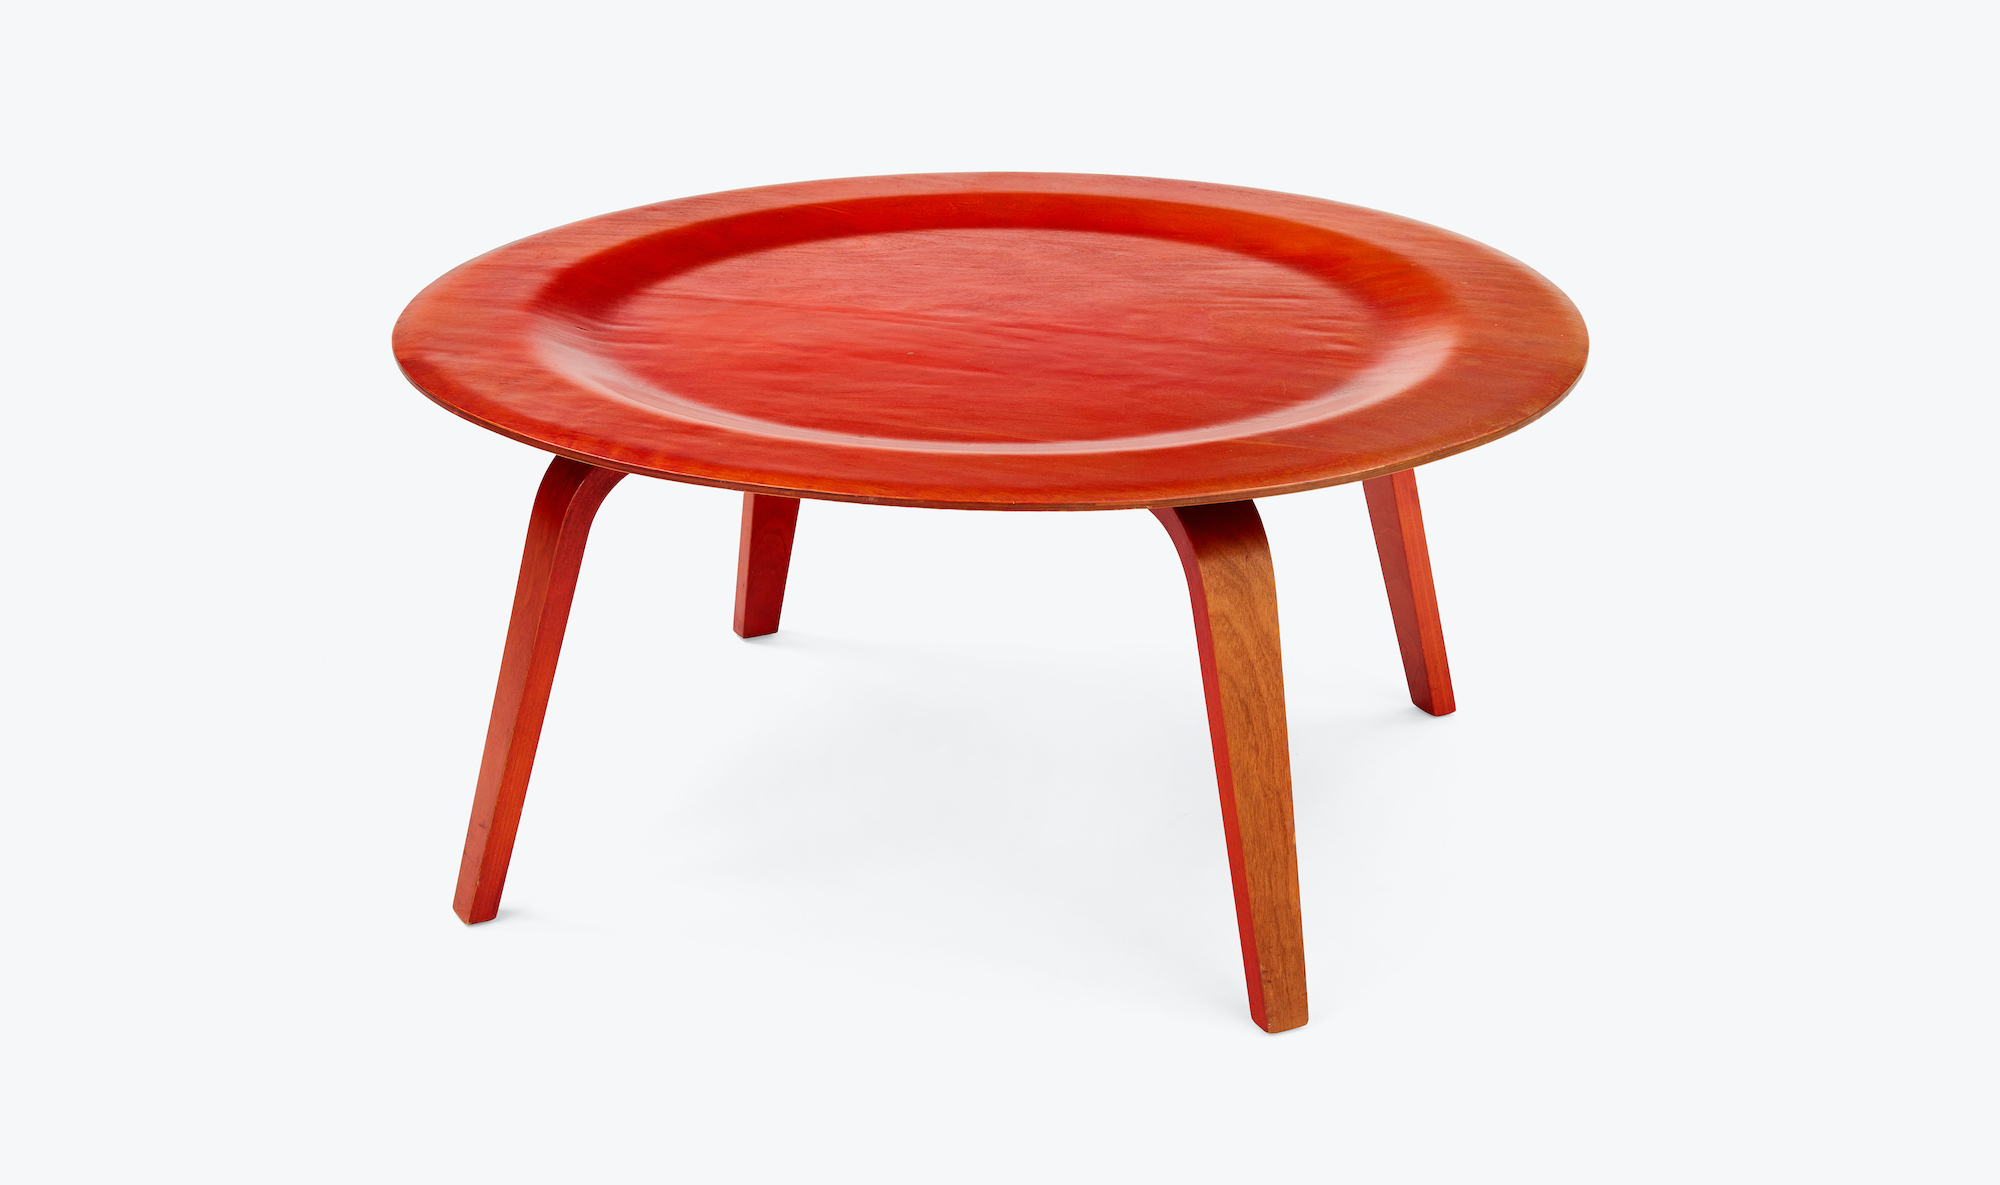 Ray and Charles Eames 1946 CTW (Coffee Table Wood) in Effect Magazine